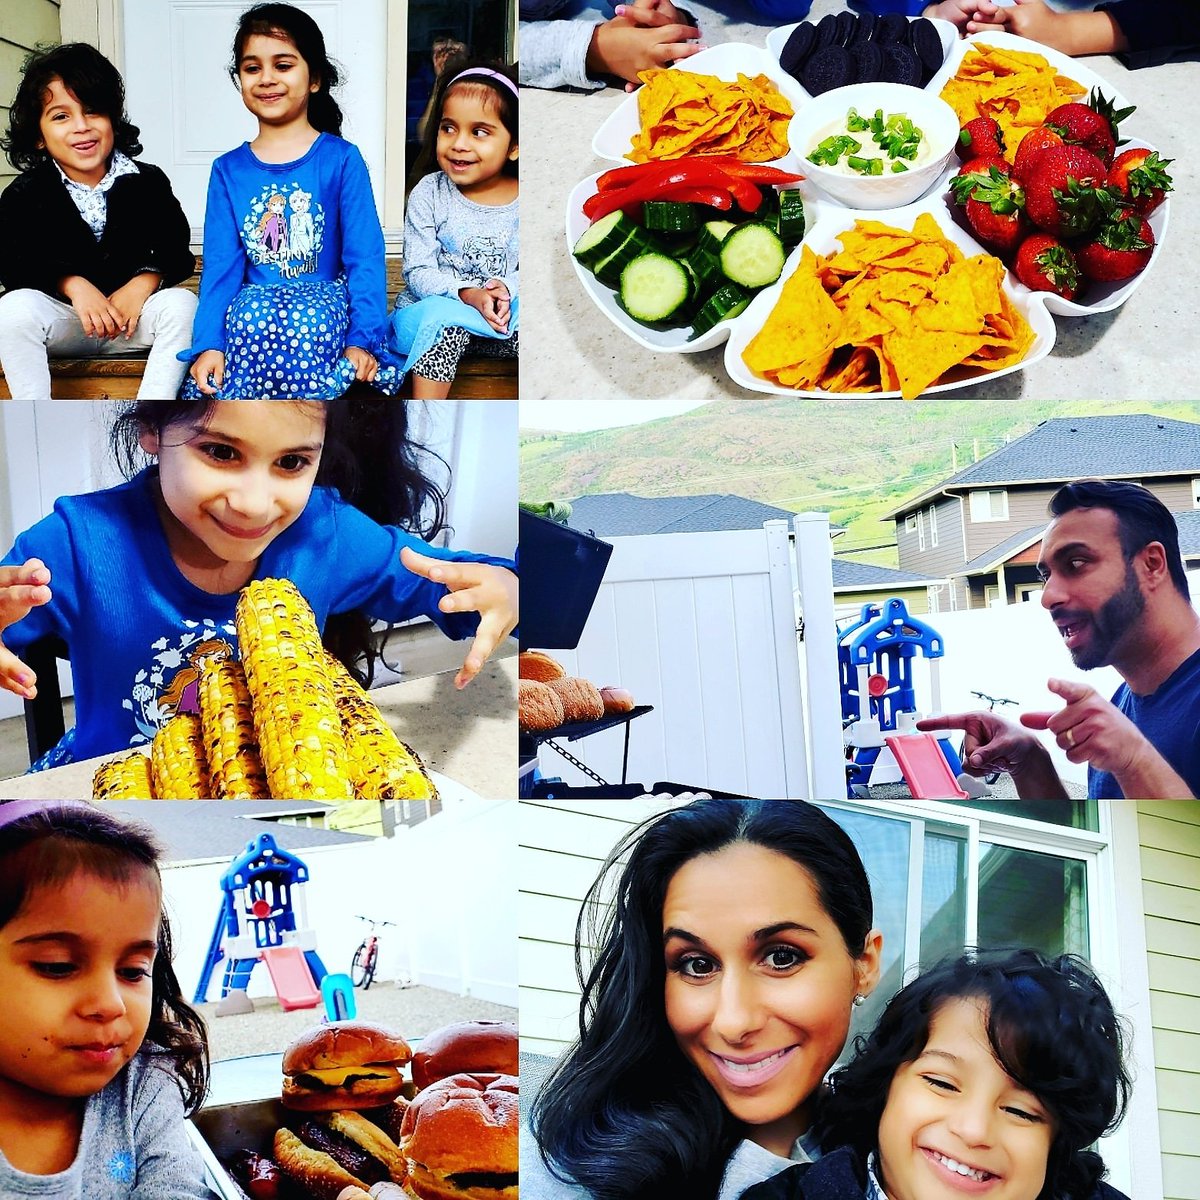 Fun times with the fam today 💞

#MyHappiness
#MomOf5
#WifeOfACarCollocter 😄
#WeLoveBBQs
#AndNature 🙌
#BlessedBeyondMeasures 🙏❤
#LoveLifeAlways